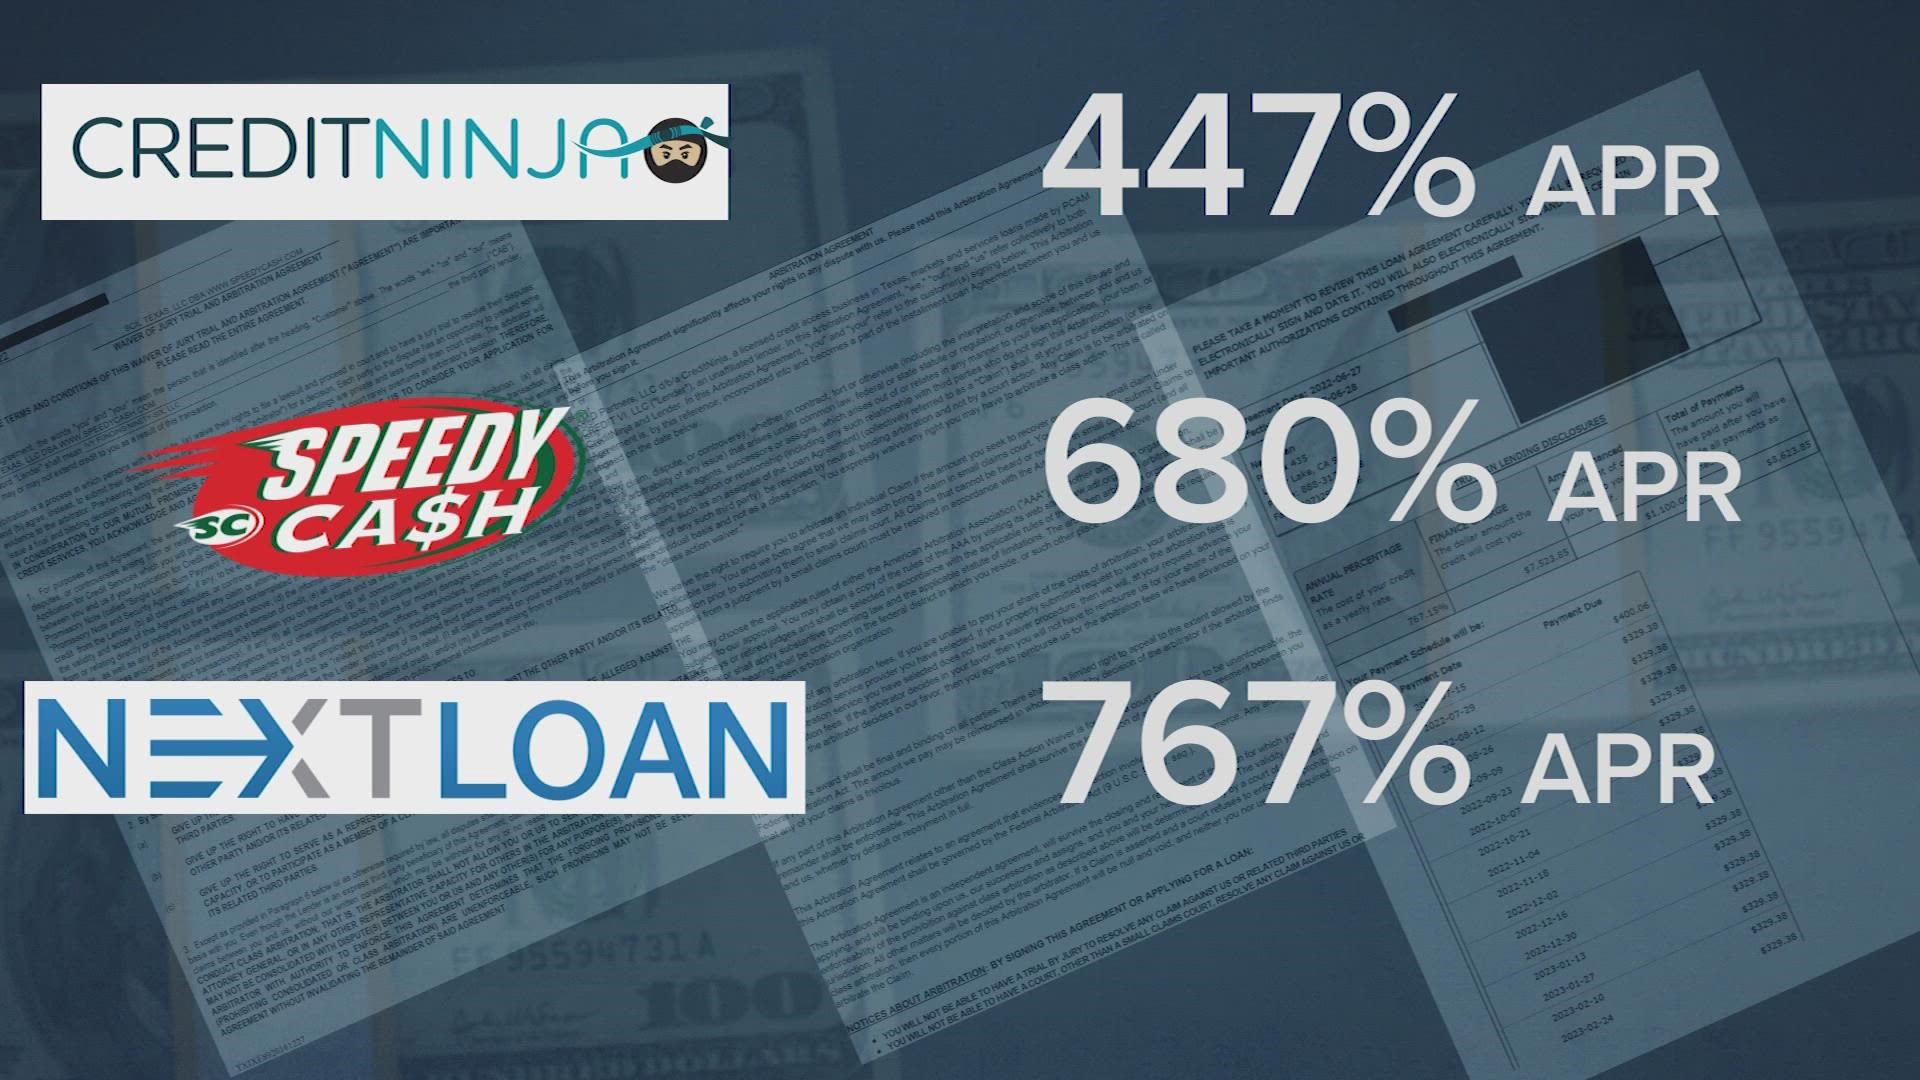 Advocates say Texas has some of the weakest laws to protect consumers from what they call predatory lending.